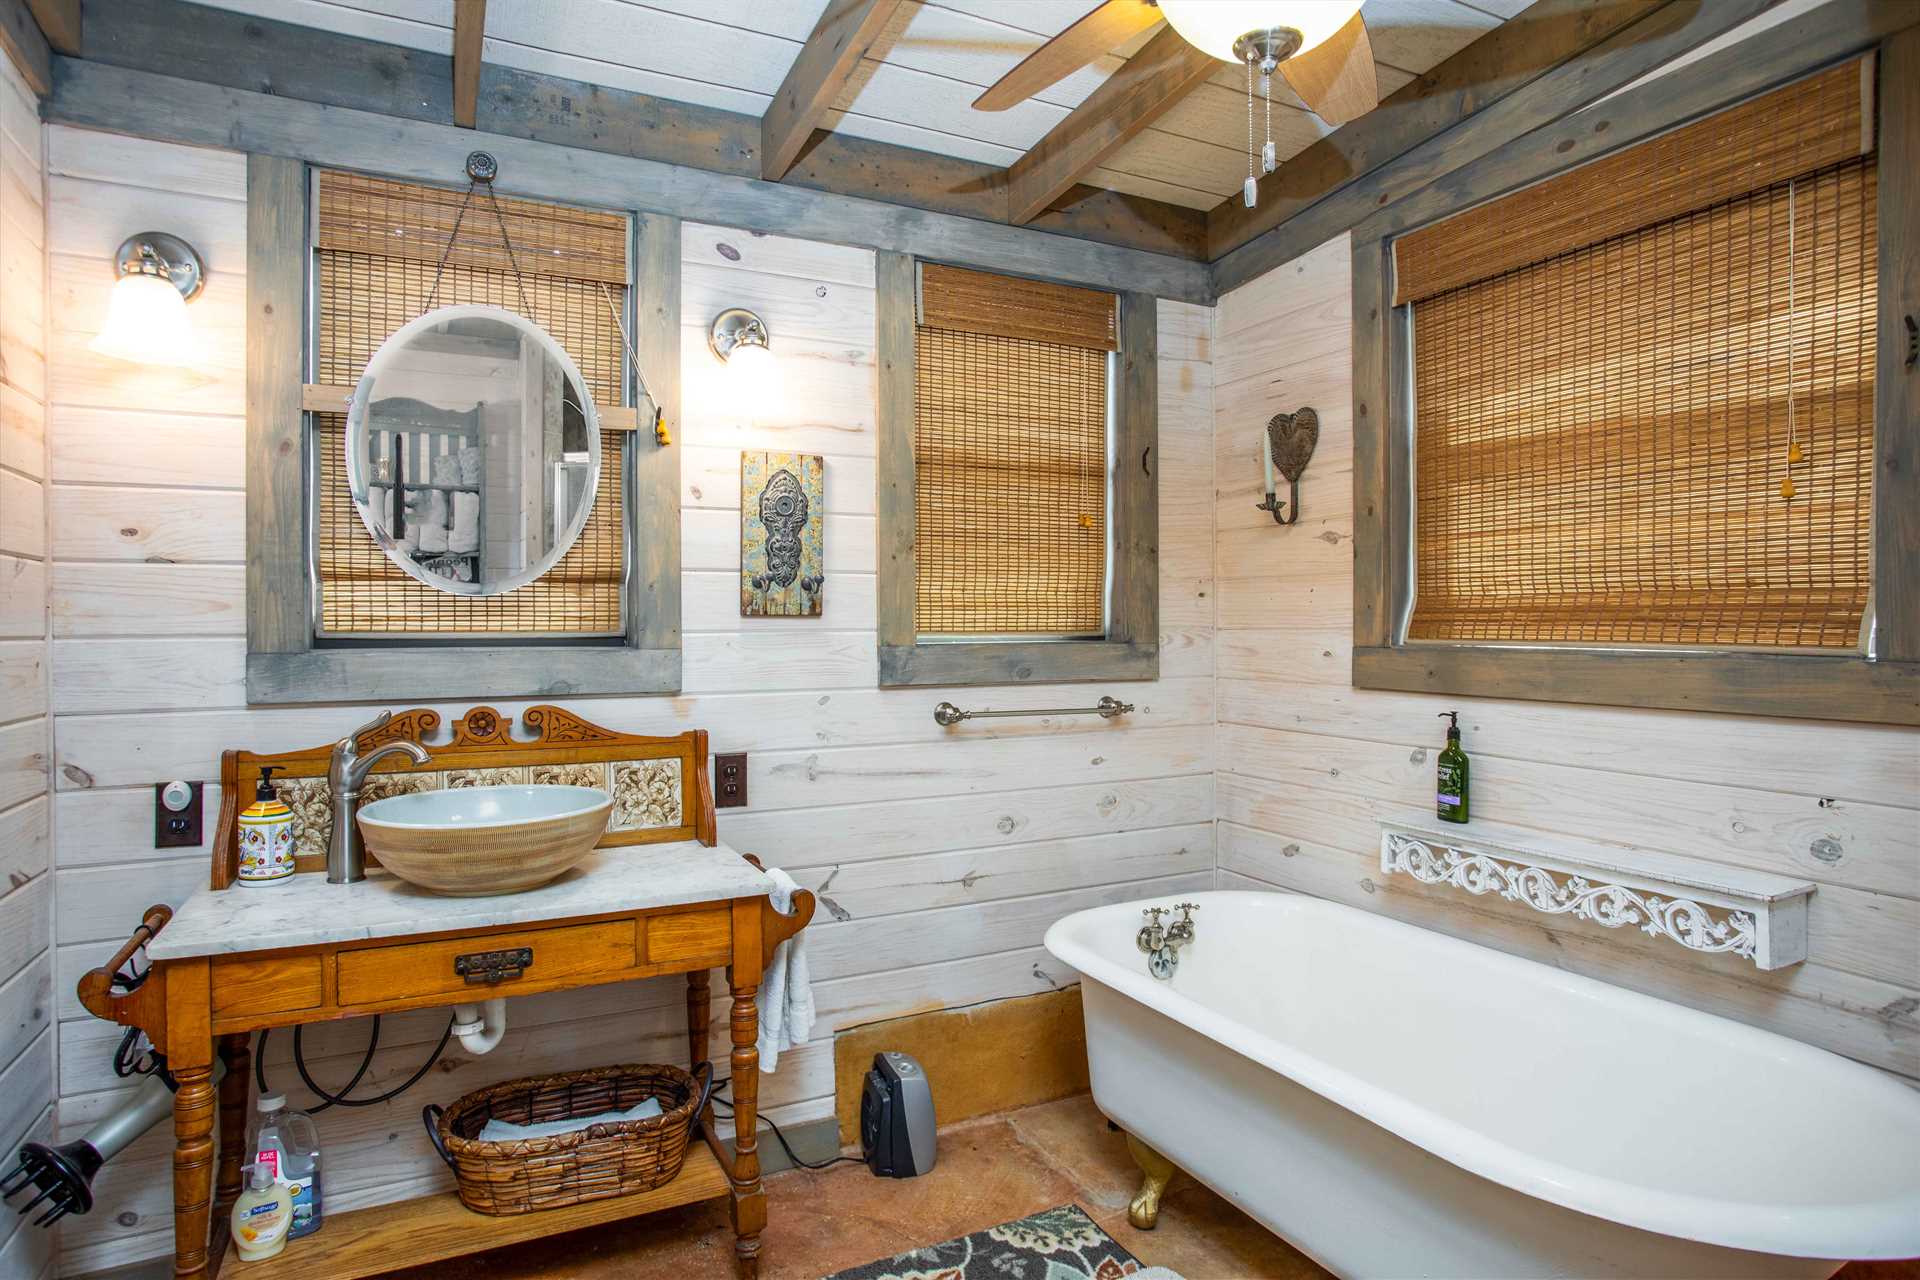                                                 The bowl-style vanity and other stylish decorative touches make even the bathrooms a pleasant part of your visit to Medina Mountain.